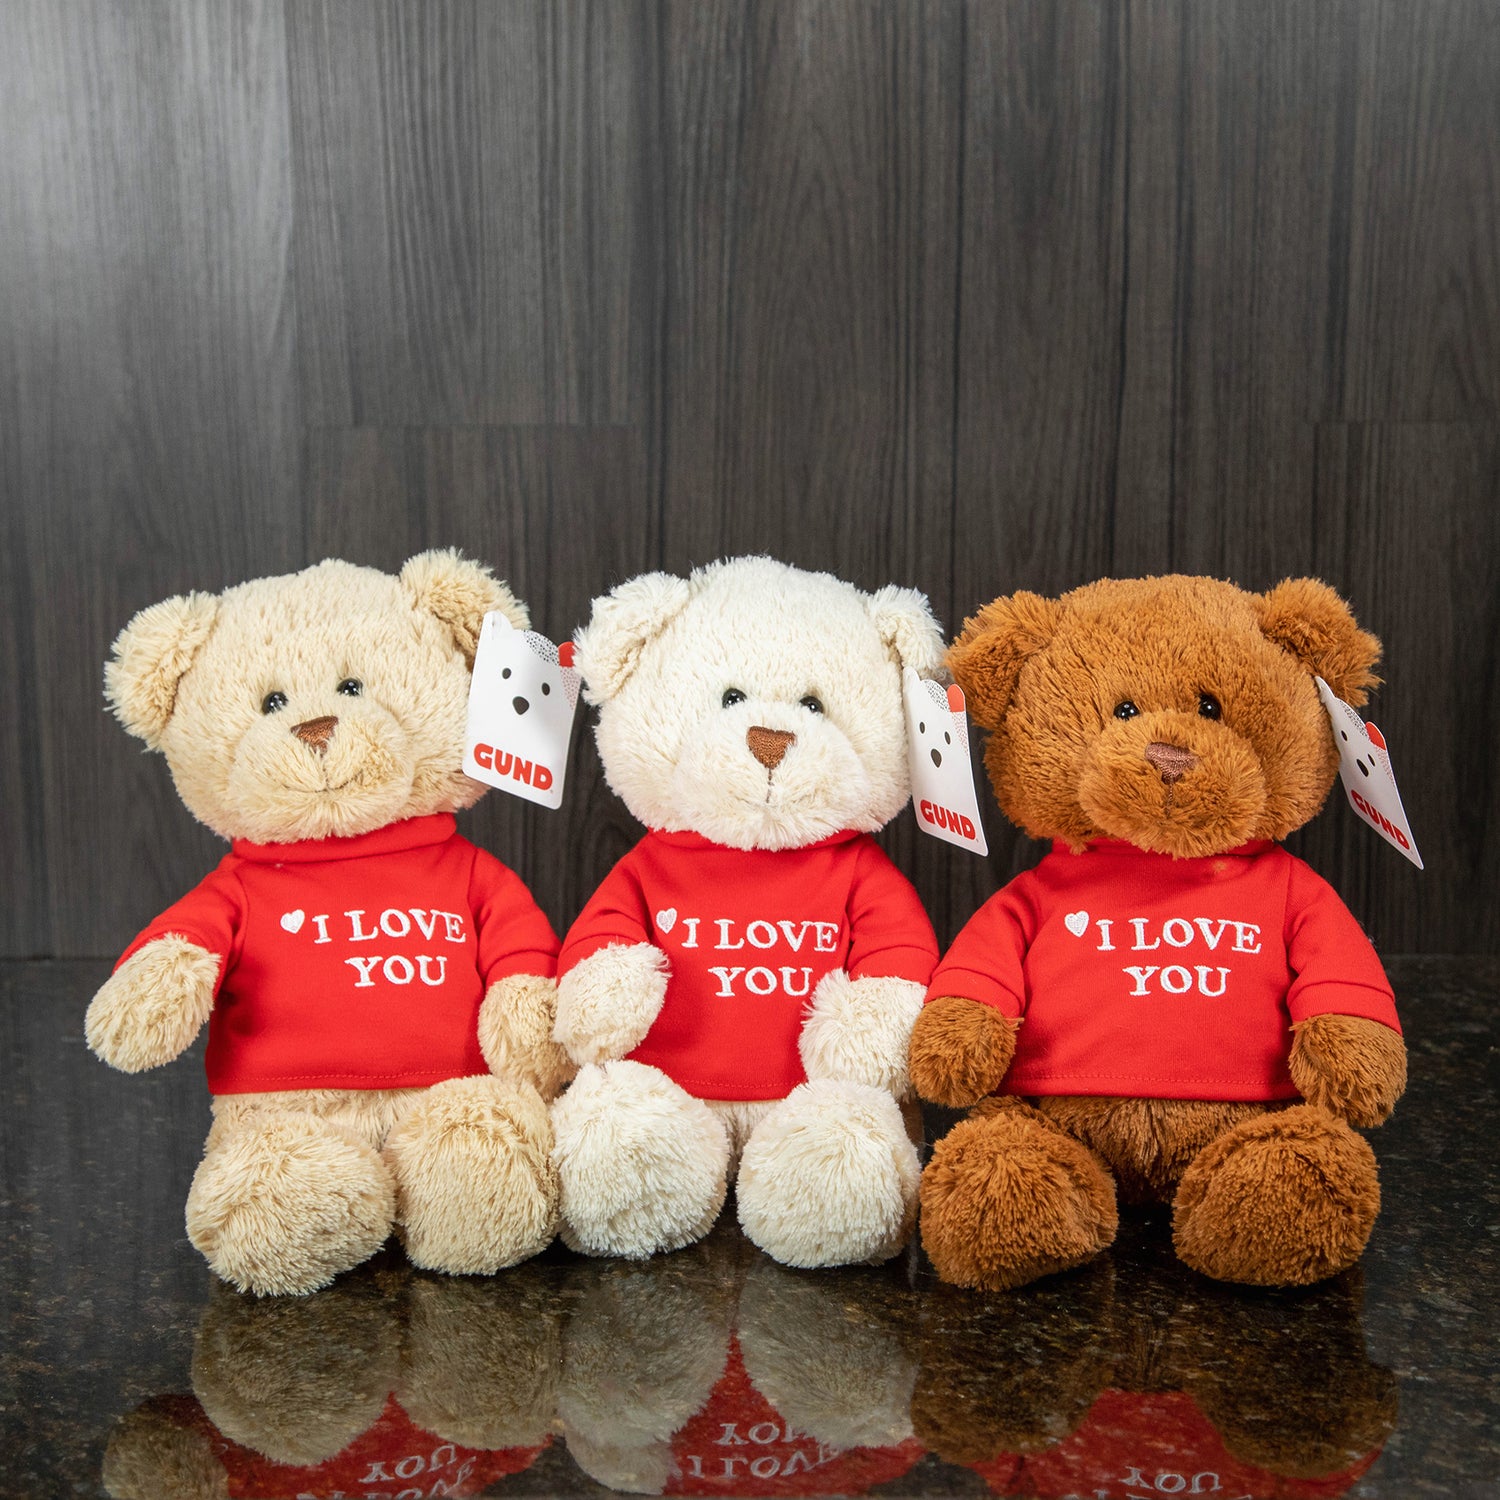 three different teddy bears in varying shades of brown wearing a red shirt that reads "I love you"